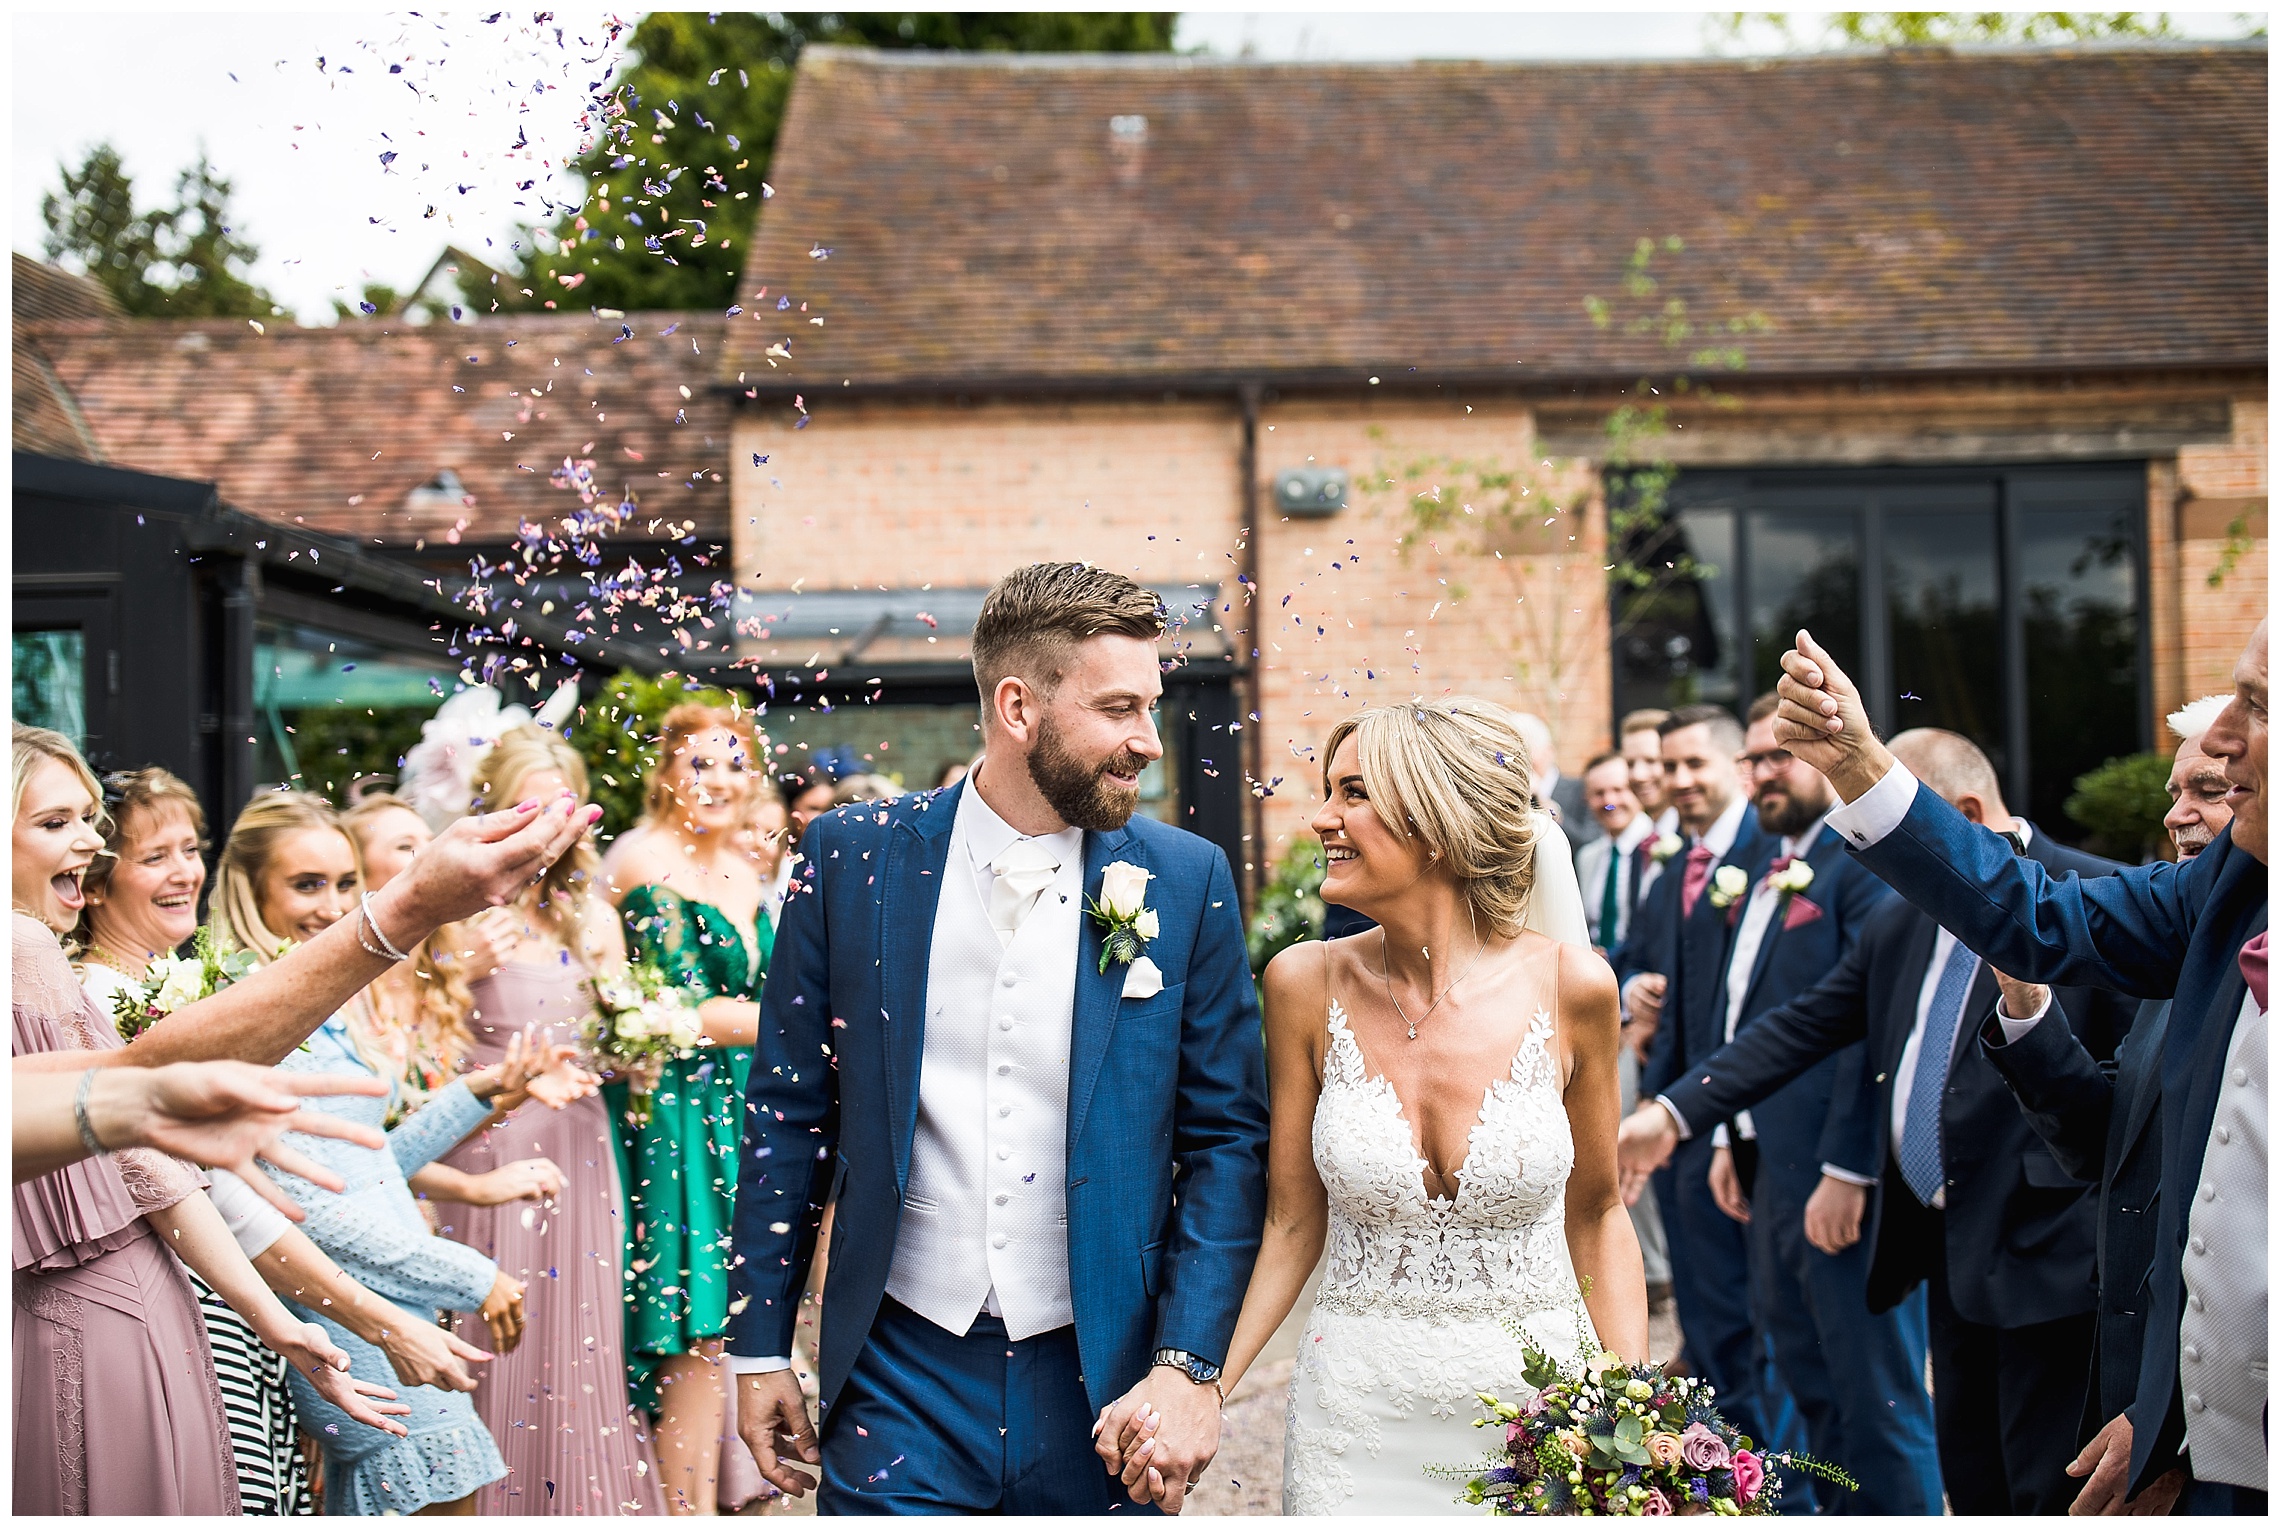 bride and groom looking at one another as guests look on and throw petal confetti at them